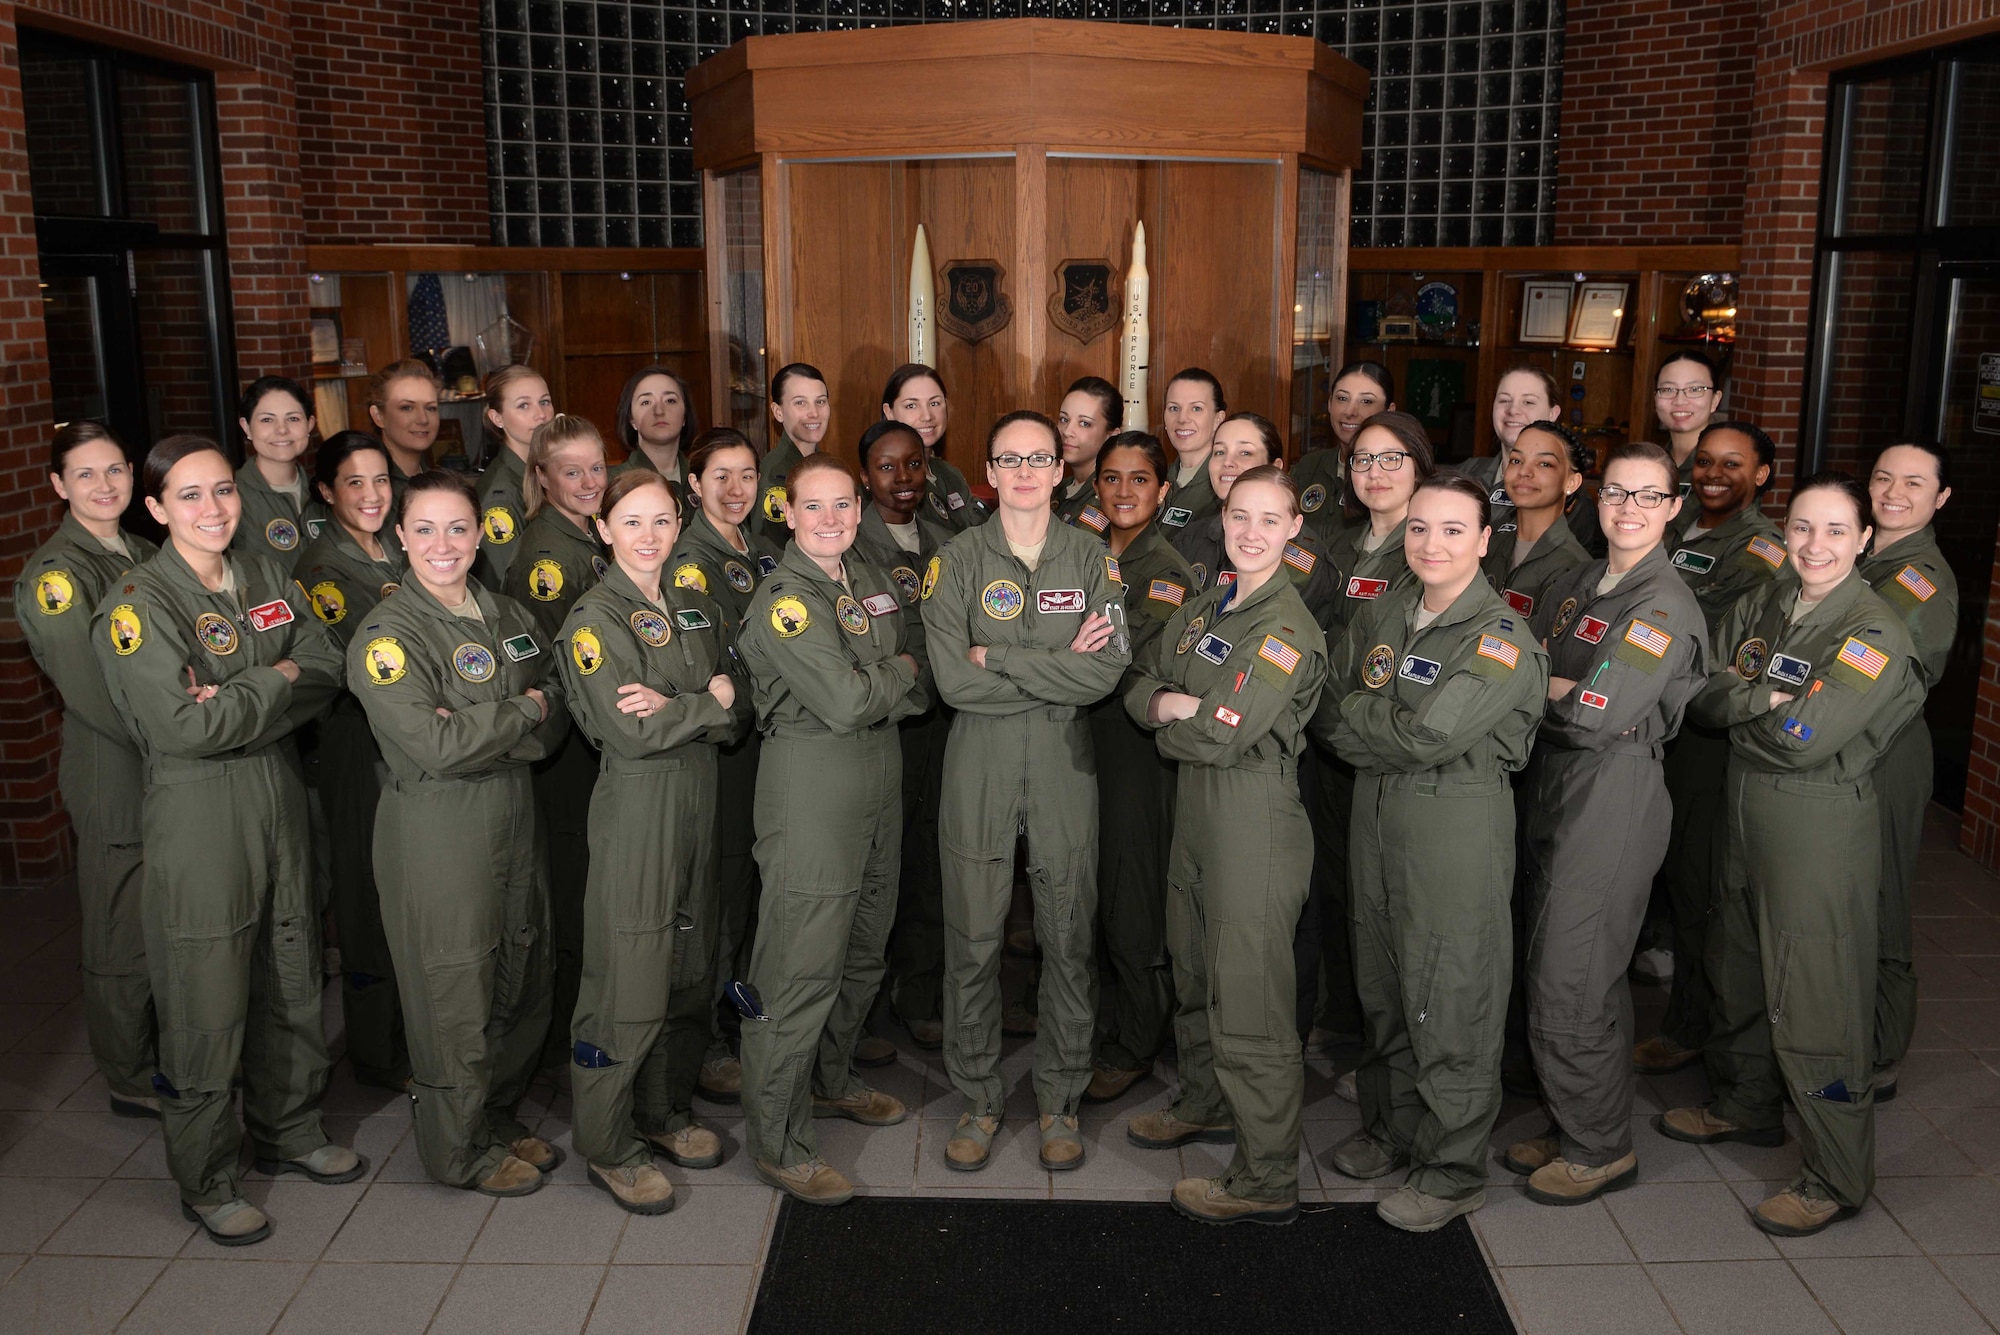 91st Missile Wing members pose for a photo in honor of Women's History month. (U.S. Air Force photo/Airman 1st Class Jessica Weissman)